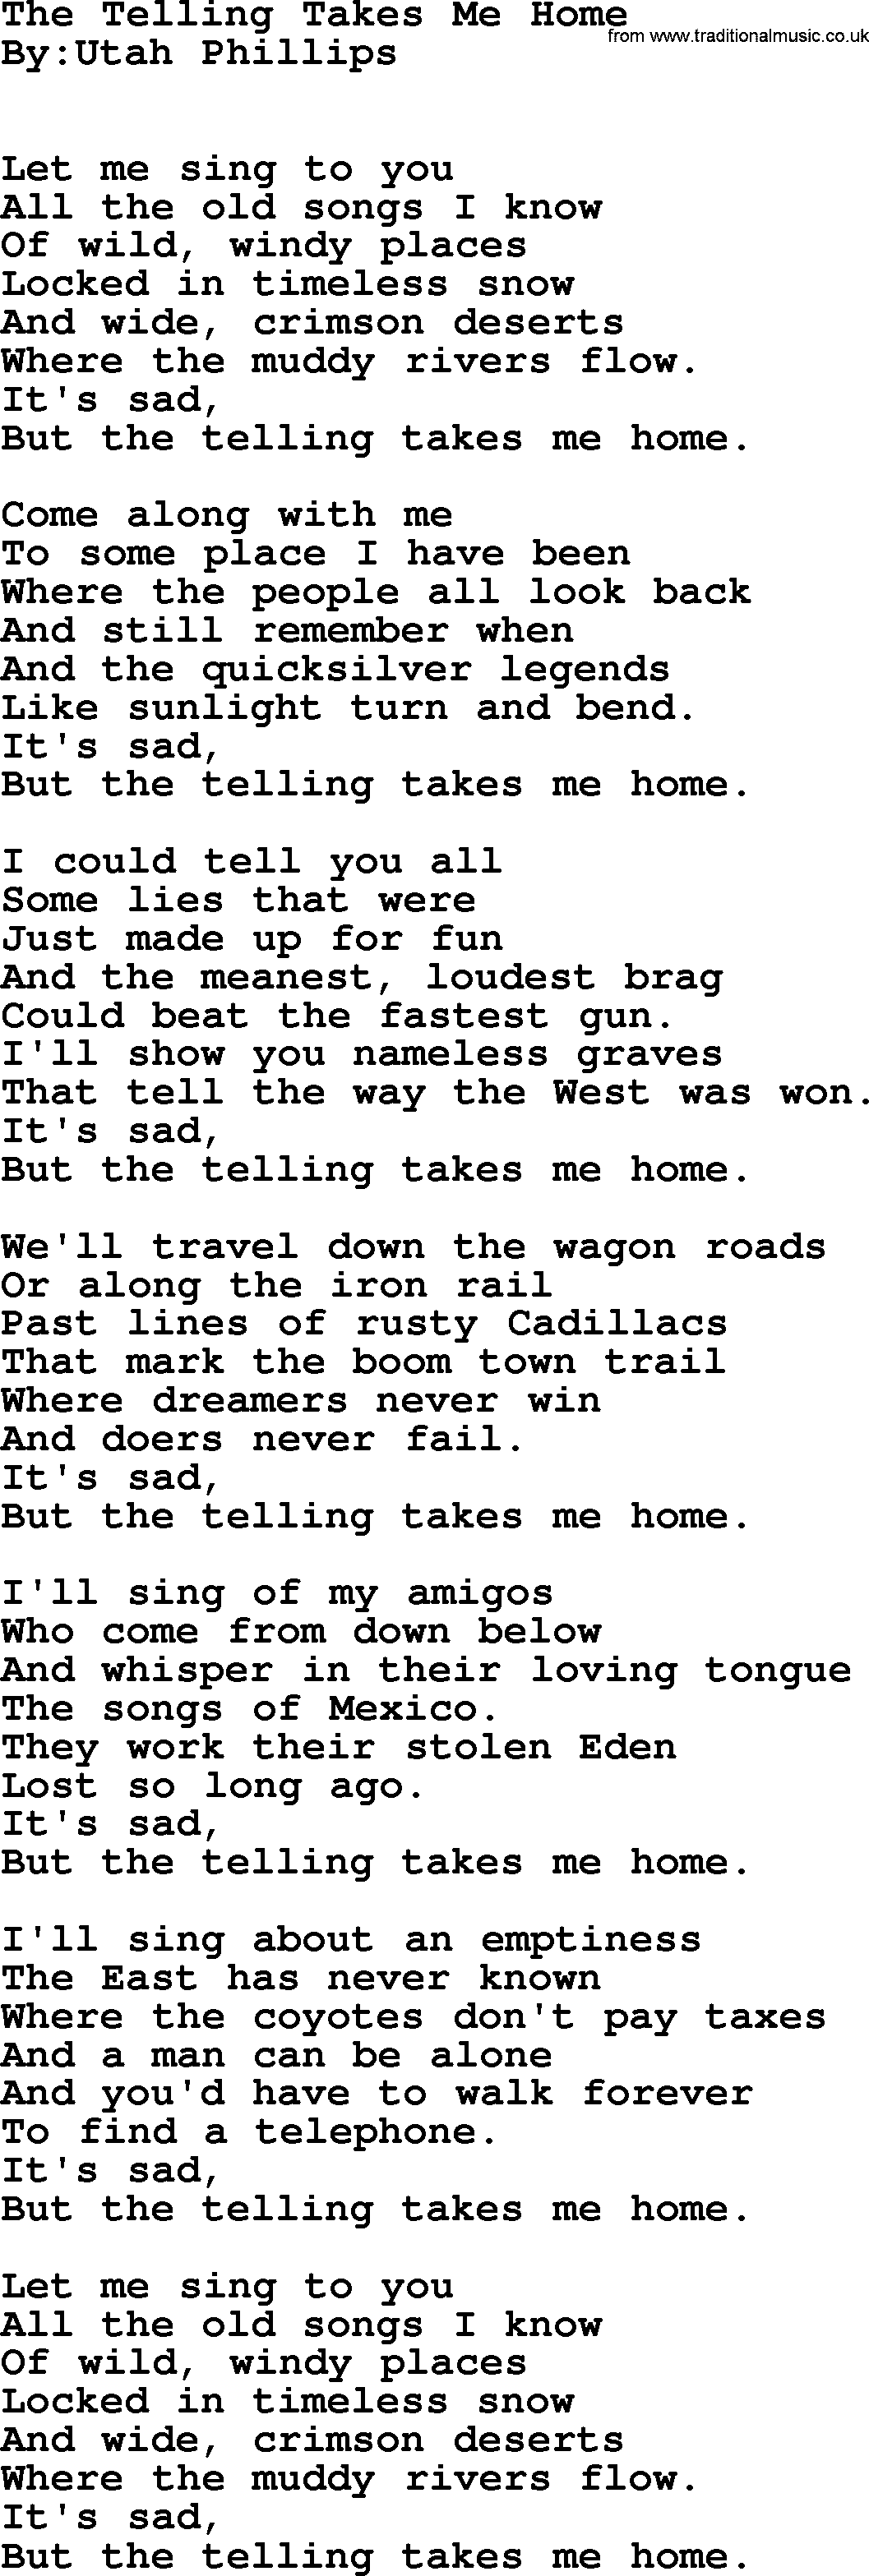 Political, Solidarity, Workers or Union song: The Telling Takes Me Home, lyrics